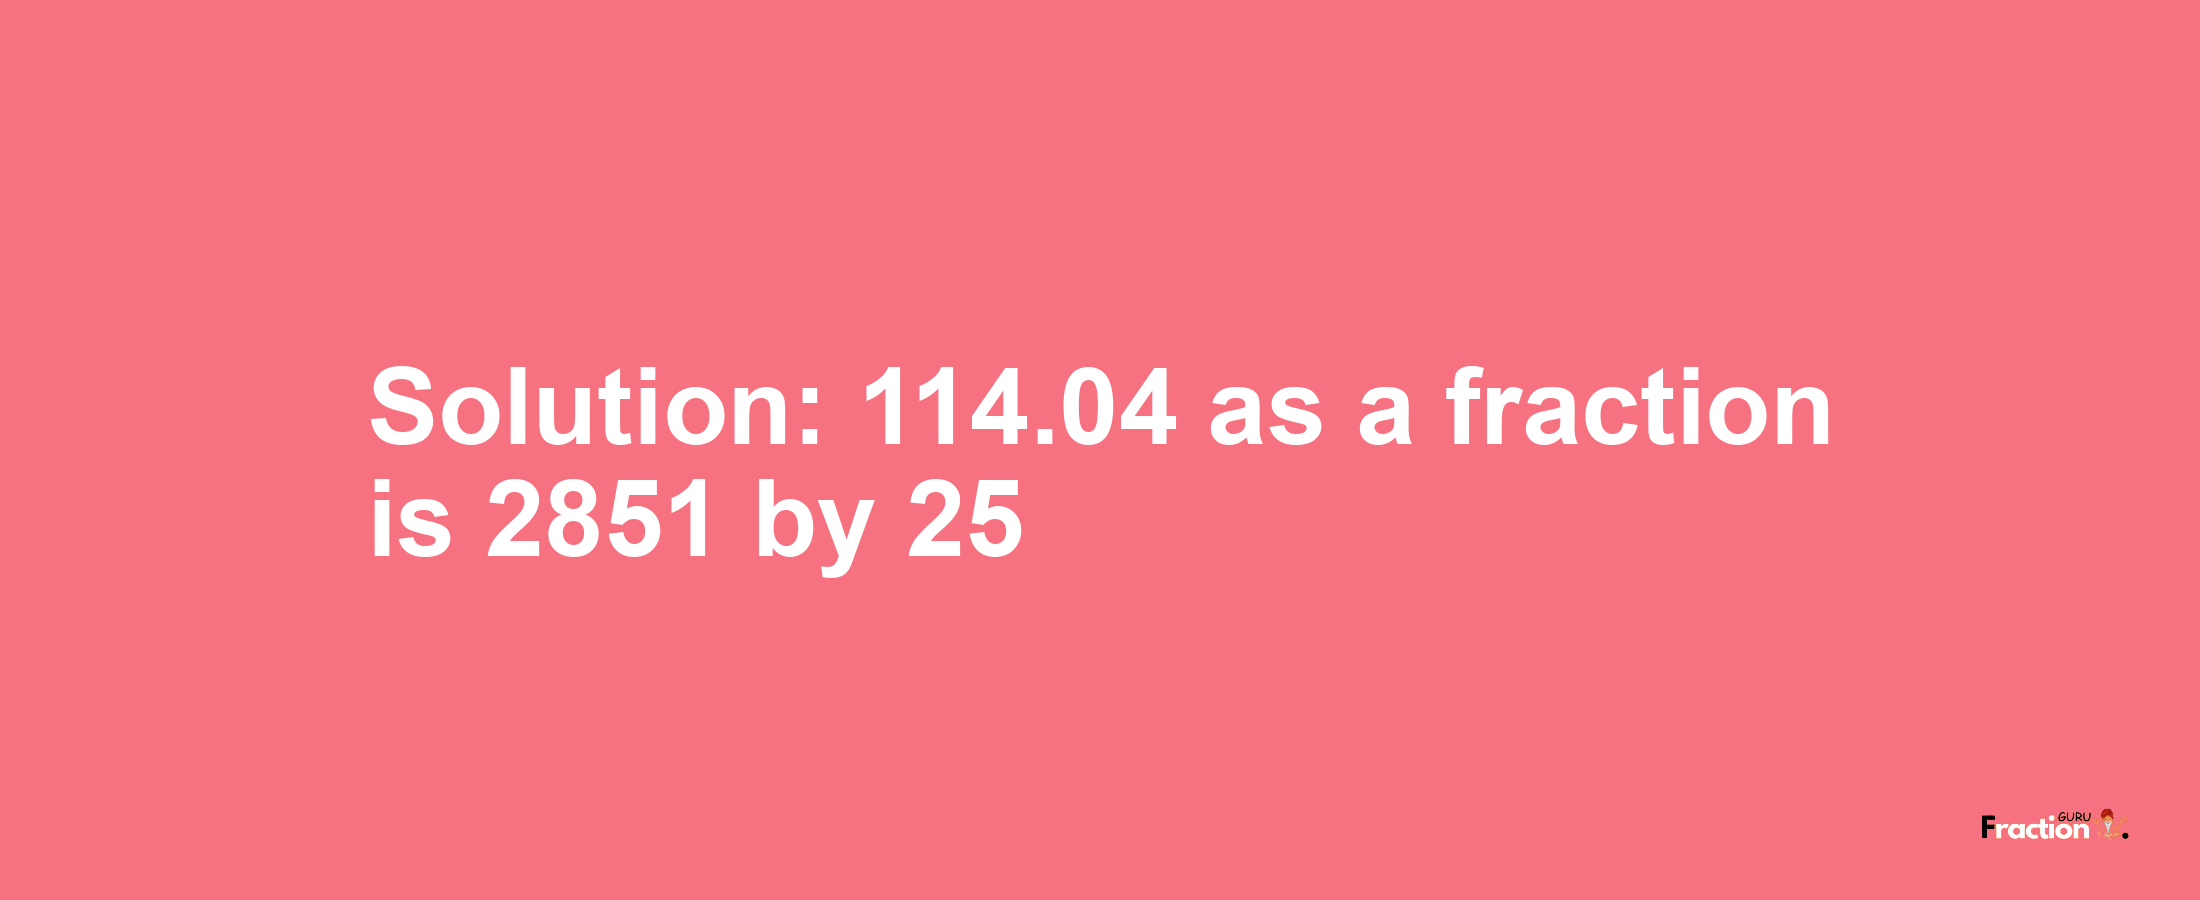 Solution:114.04 as a fraction is 2851/25